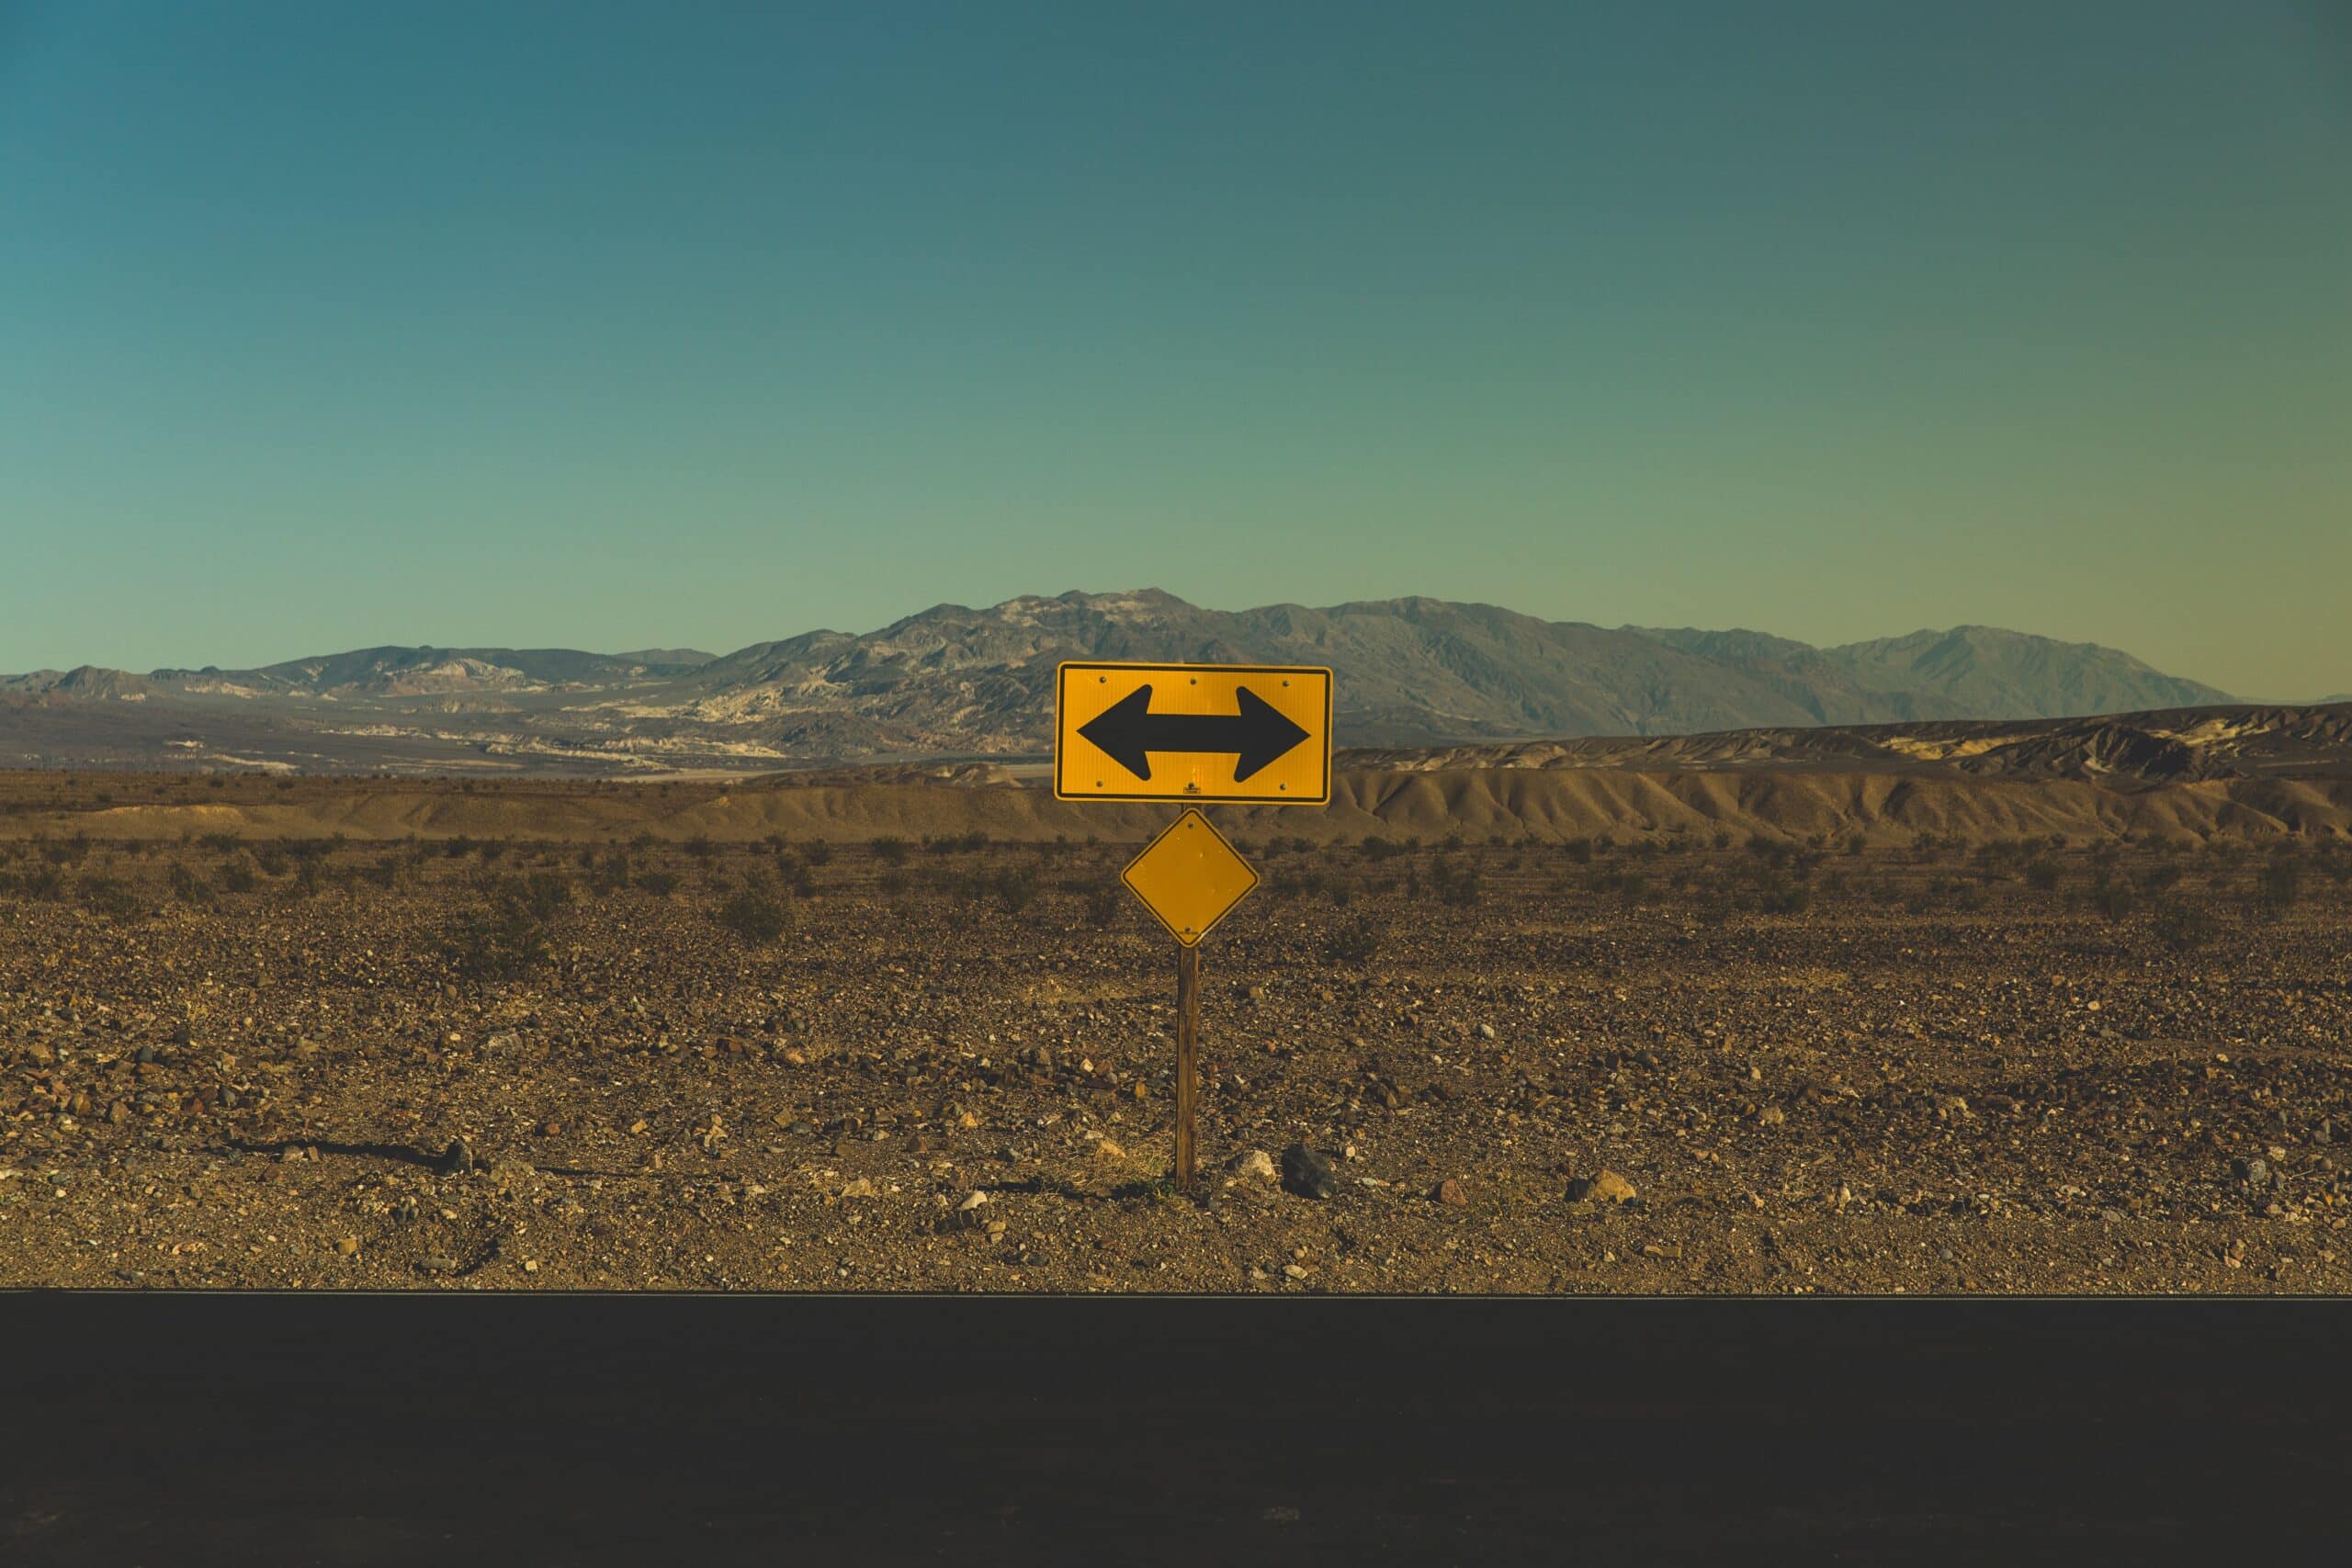 A photo of a desert with a traffic sign with arrows pointing in opposite directions representing bidirectional sandbox seeding